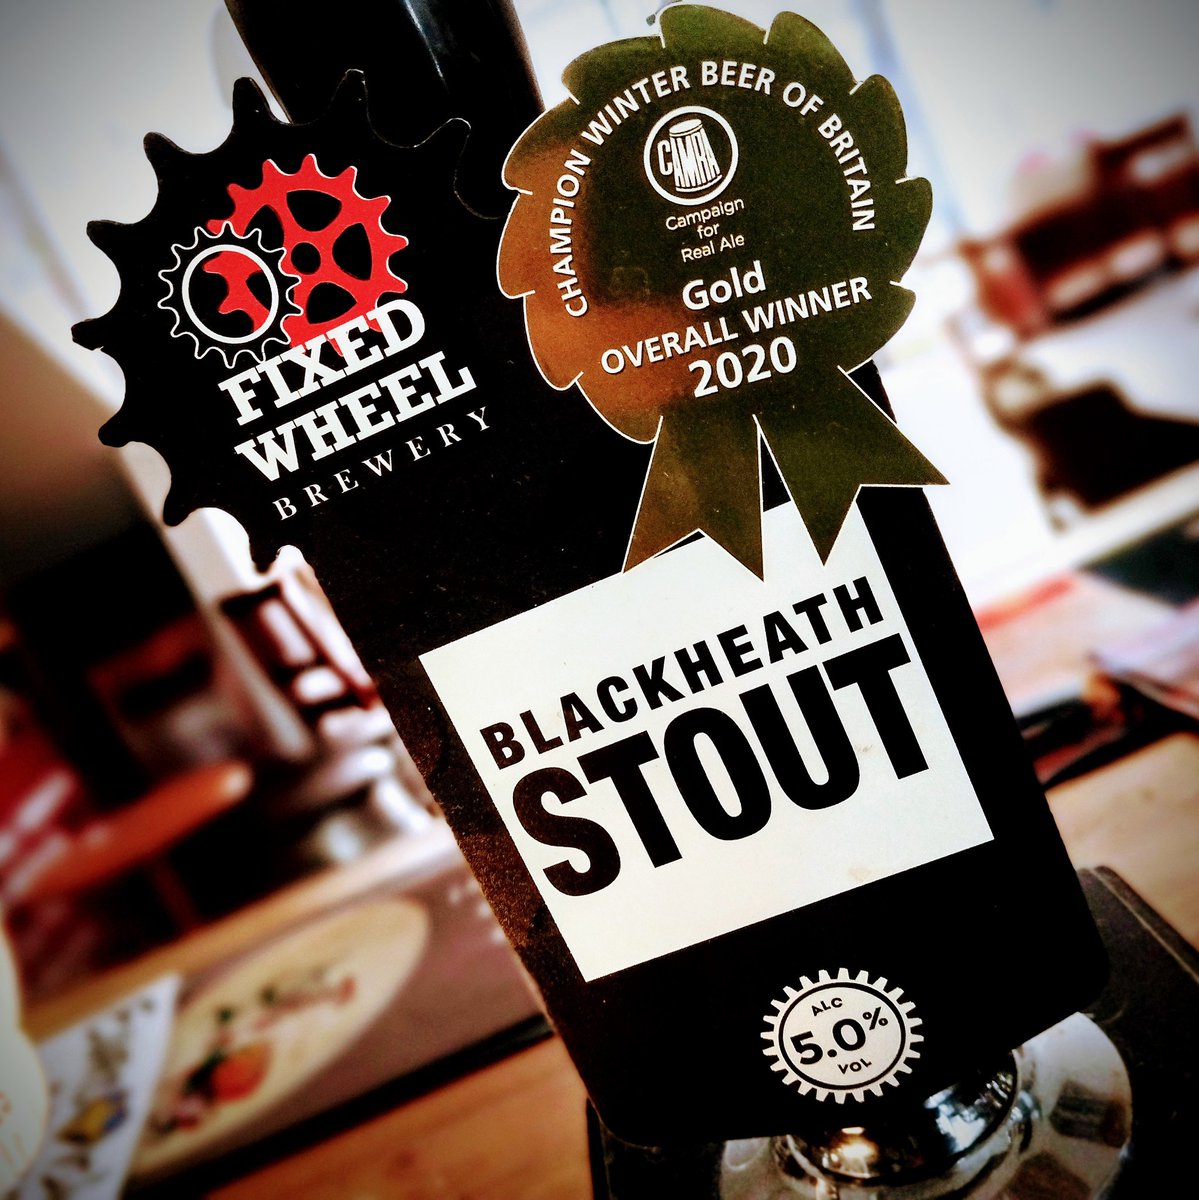 Roasty, oaky and smooth... A multi-award winning stout-flavoured stout from Fixed Wheel Brewery! Open from 4pm 👍 #colwynbay #alehouse #pub